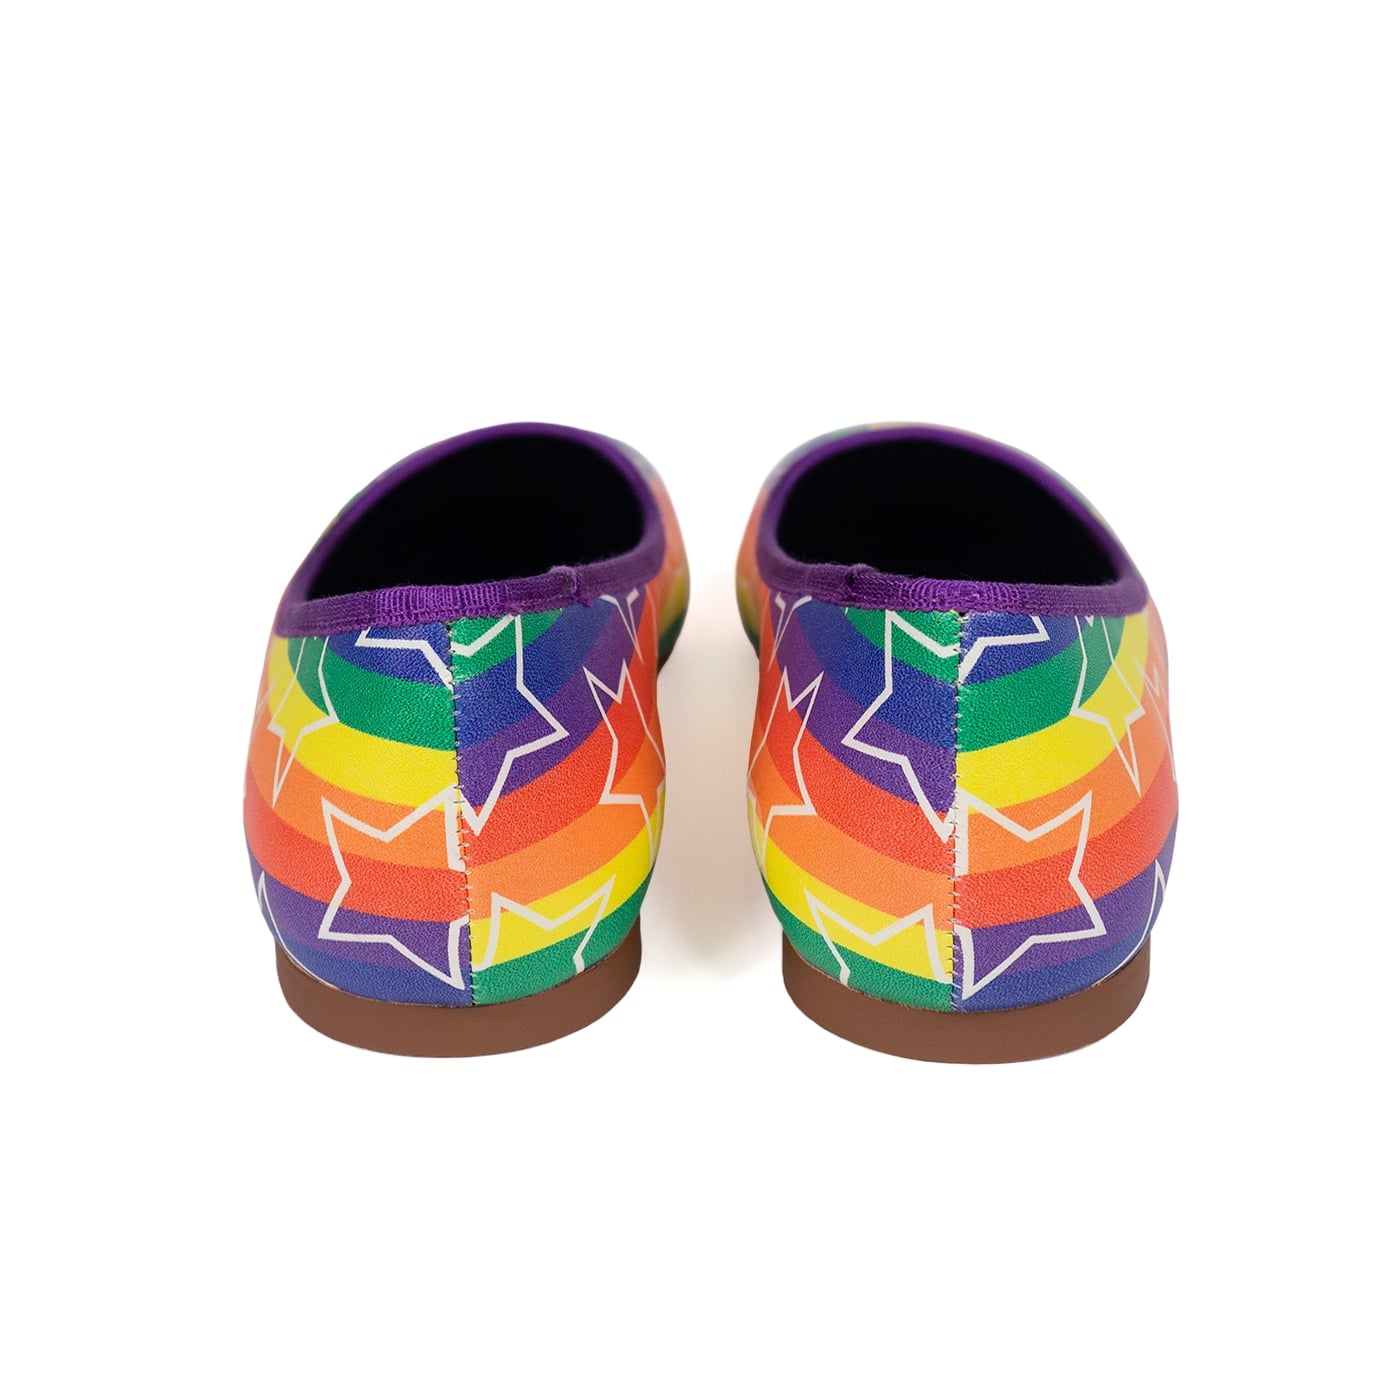 Starburst Ballet Flats by RainbowsAndFairies.com.au (Rainbow Brite Inspired - Stars - Mismatched Shoes - Pride - Rainbow Stripes - Slip On Shoes) - SKU: FW_BALET_STARB_ORG - Pic-05